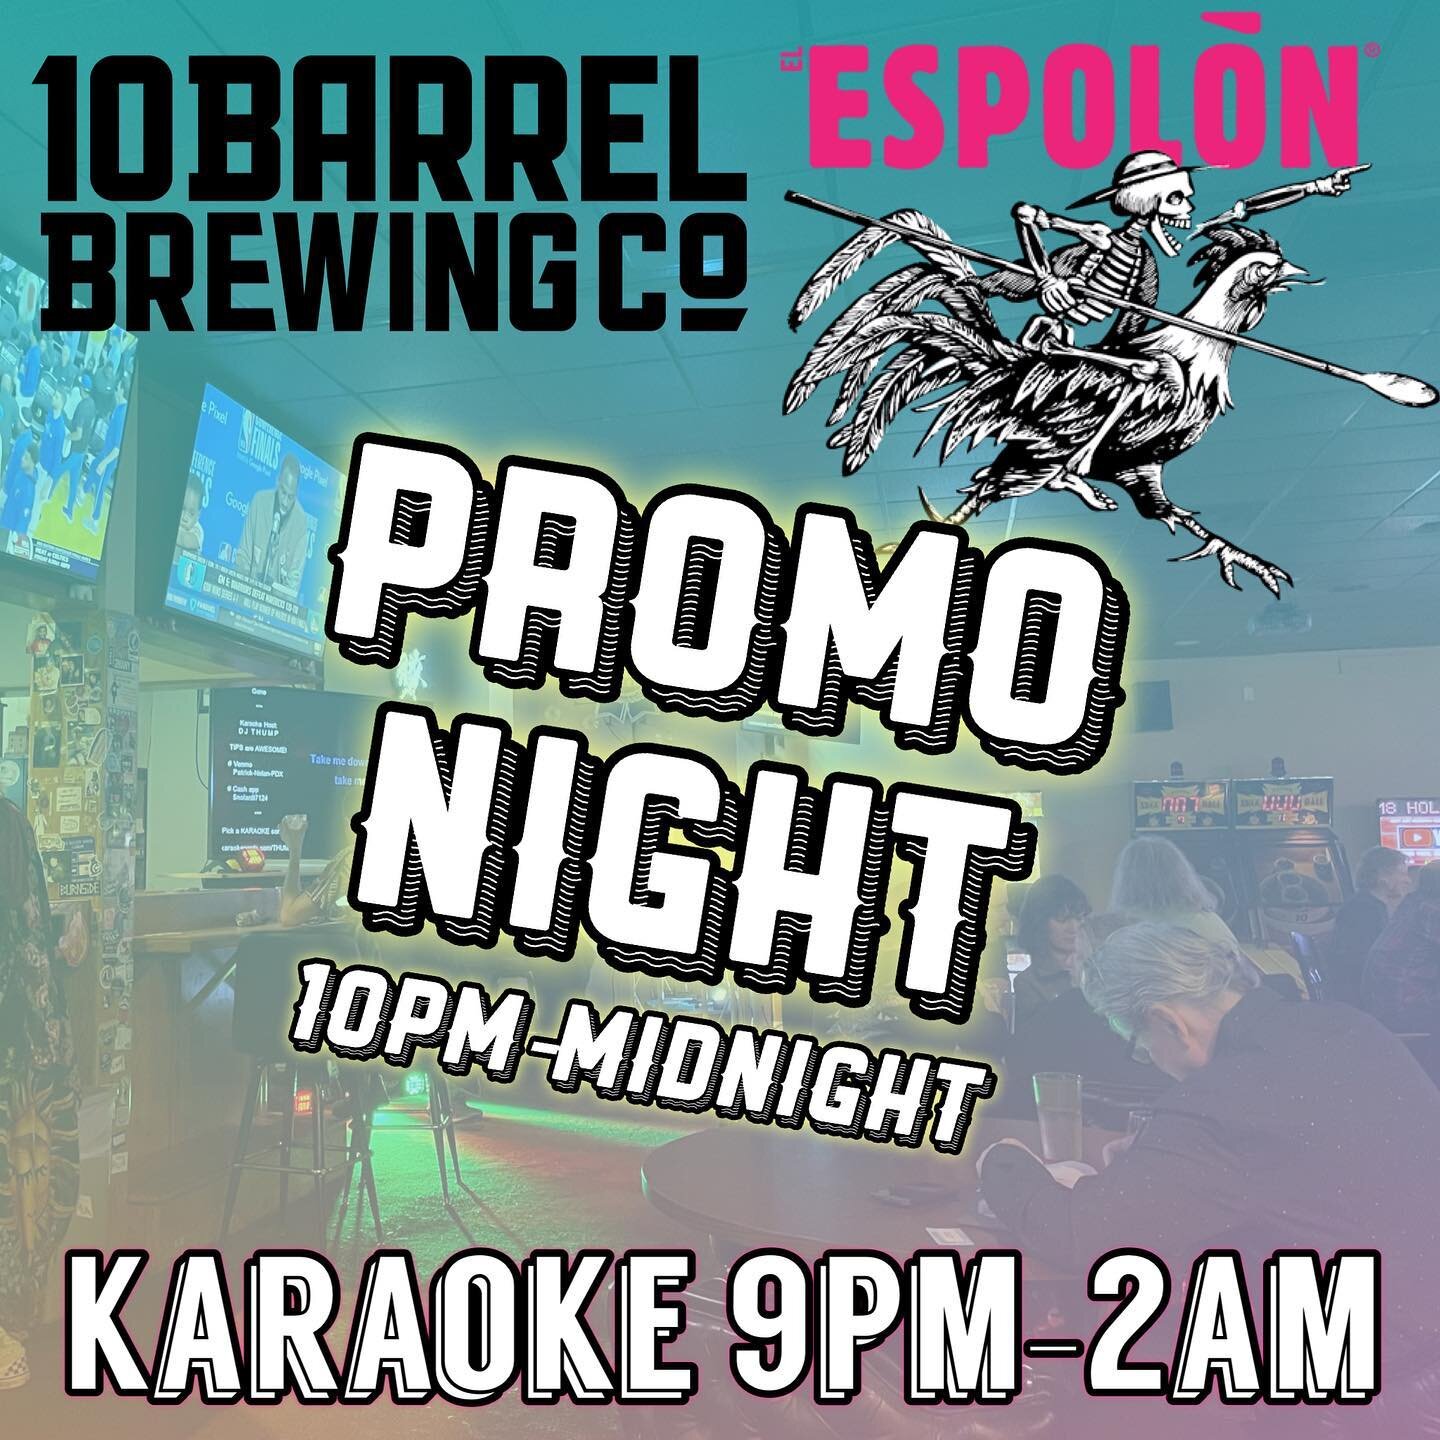 Warm up those vocal chords and come hang with us tonight 🎤🎶 it&rsquo;s gonna be one hell of a party 😈

Enjoy samples of Espol&oacute;n Margaritas and 10 Barrel&rsquo;s Raspberry Sour from 10pm &lsquo;til midnight 💥 

Swing by, grab a table, and s